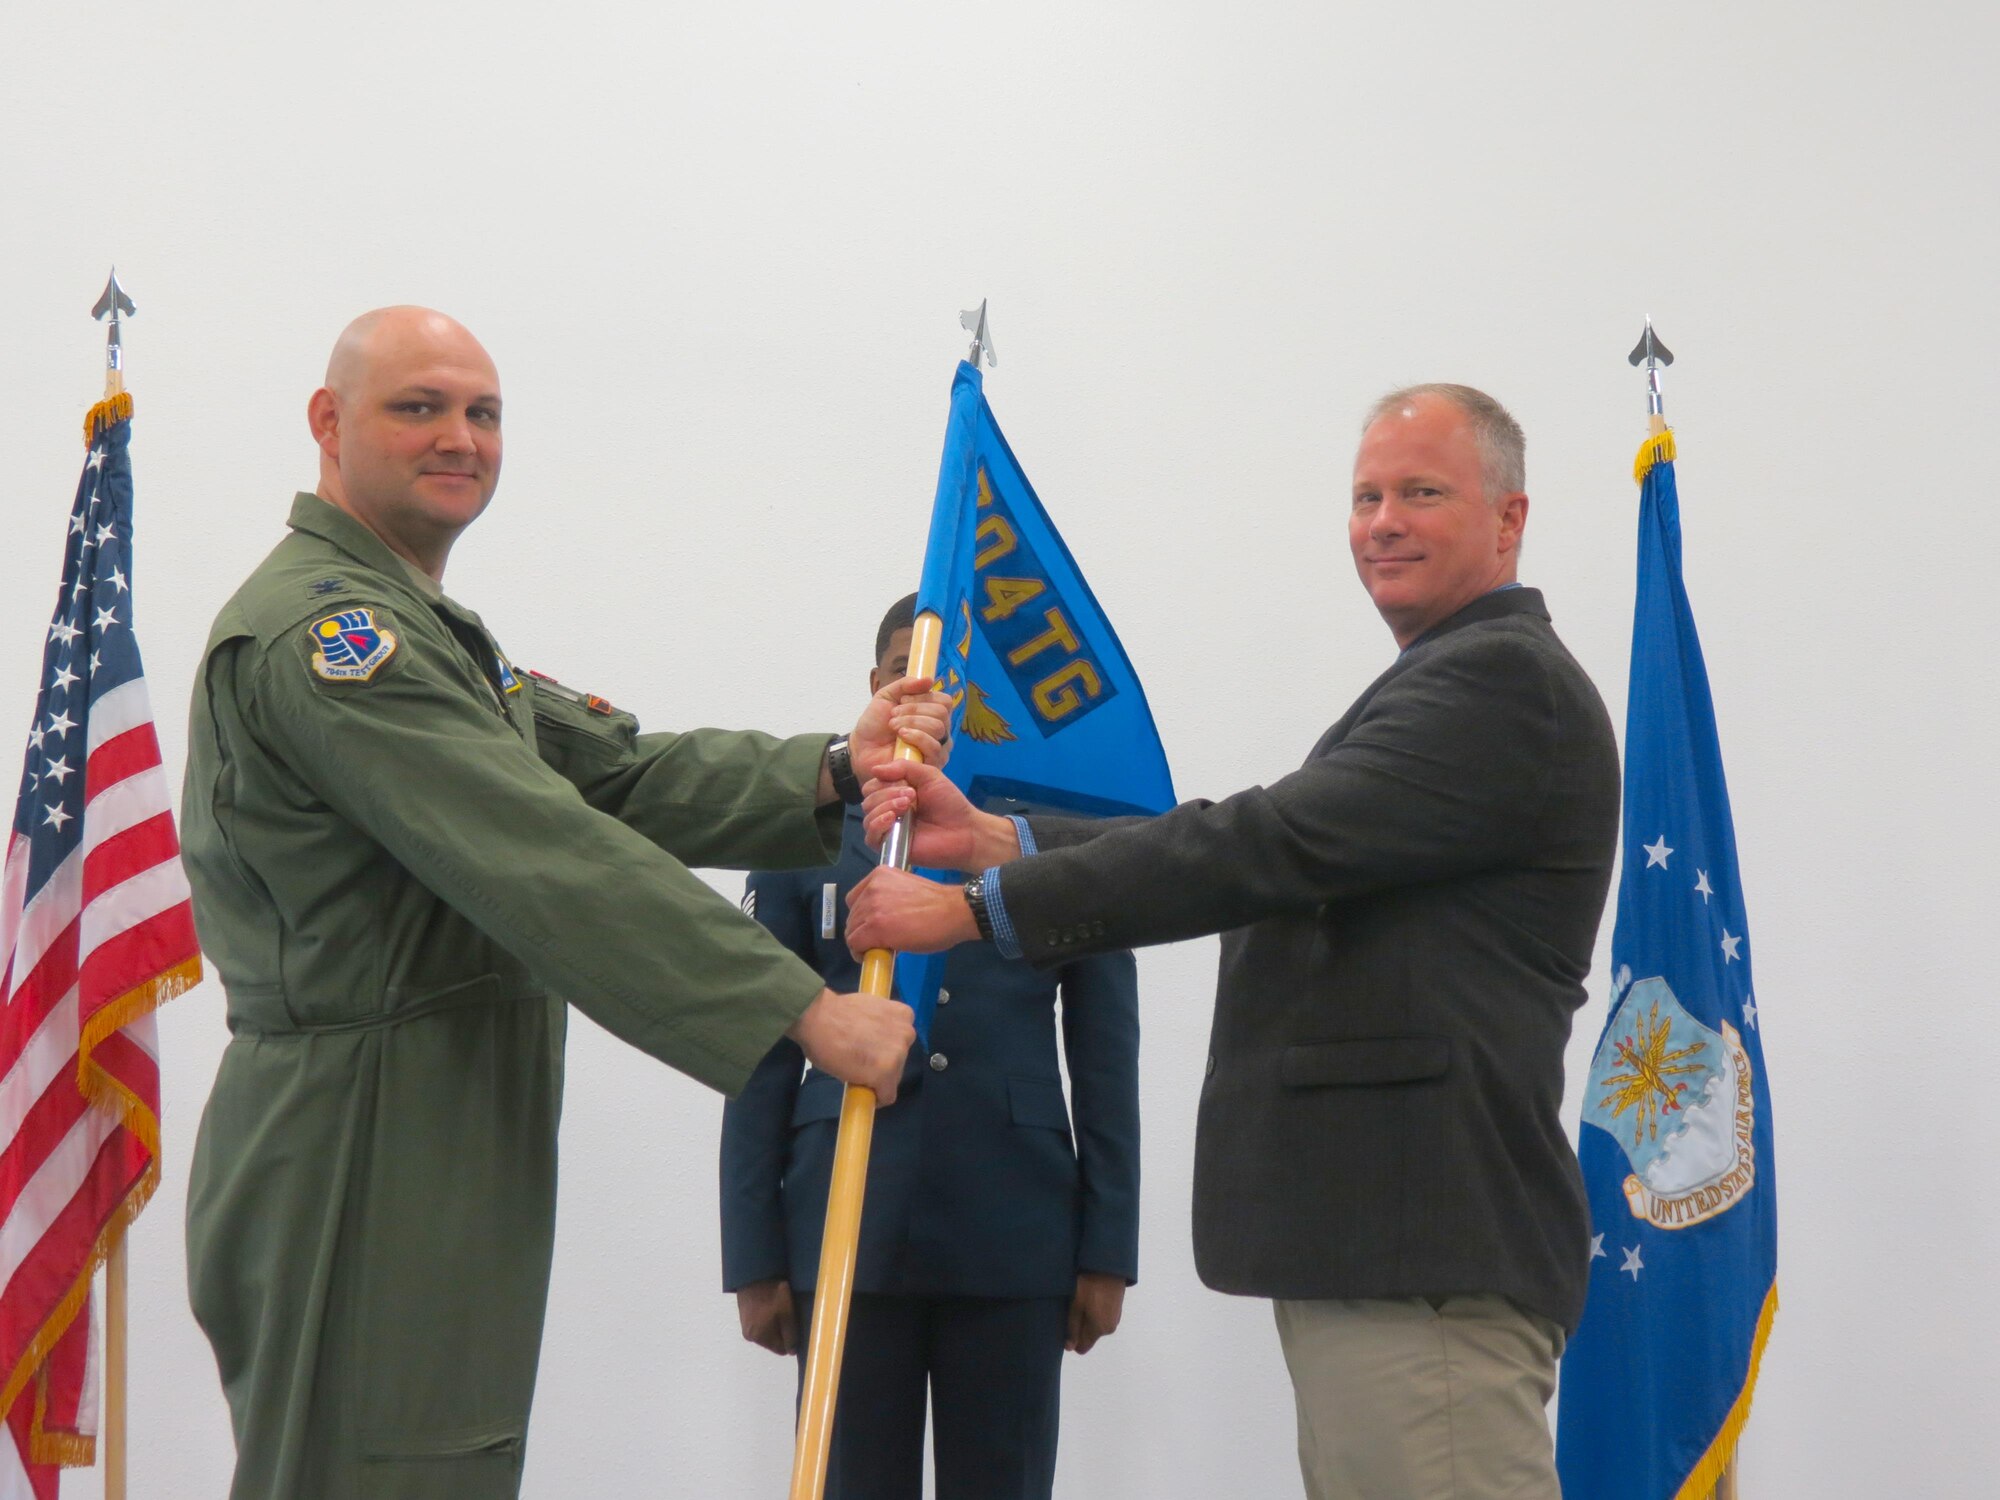 Col. Andrew Allen, commander of the 704th Test Group, appoints the command responsibility of the 704th Test Support Squadron to Eric Lagier during a Change of Responsibility ceremony Dec. 19, 2016, at Holloman Air Force Base, N.M. The 704th TG is an AEDC organization. The 704th TSS oversees operational support to the 704th TG missions which is to operate world-class test facilities for high speed sled track testing, navigation and guidance system testing, radar signature measurements, weapon systems flight testing, and acts as the Air Force liaison for all Air Force programs tested at White Sands Missile Range. (U.S. Air Force photo/Capt. Michael Rodgers)